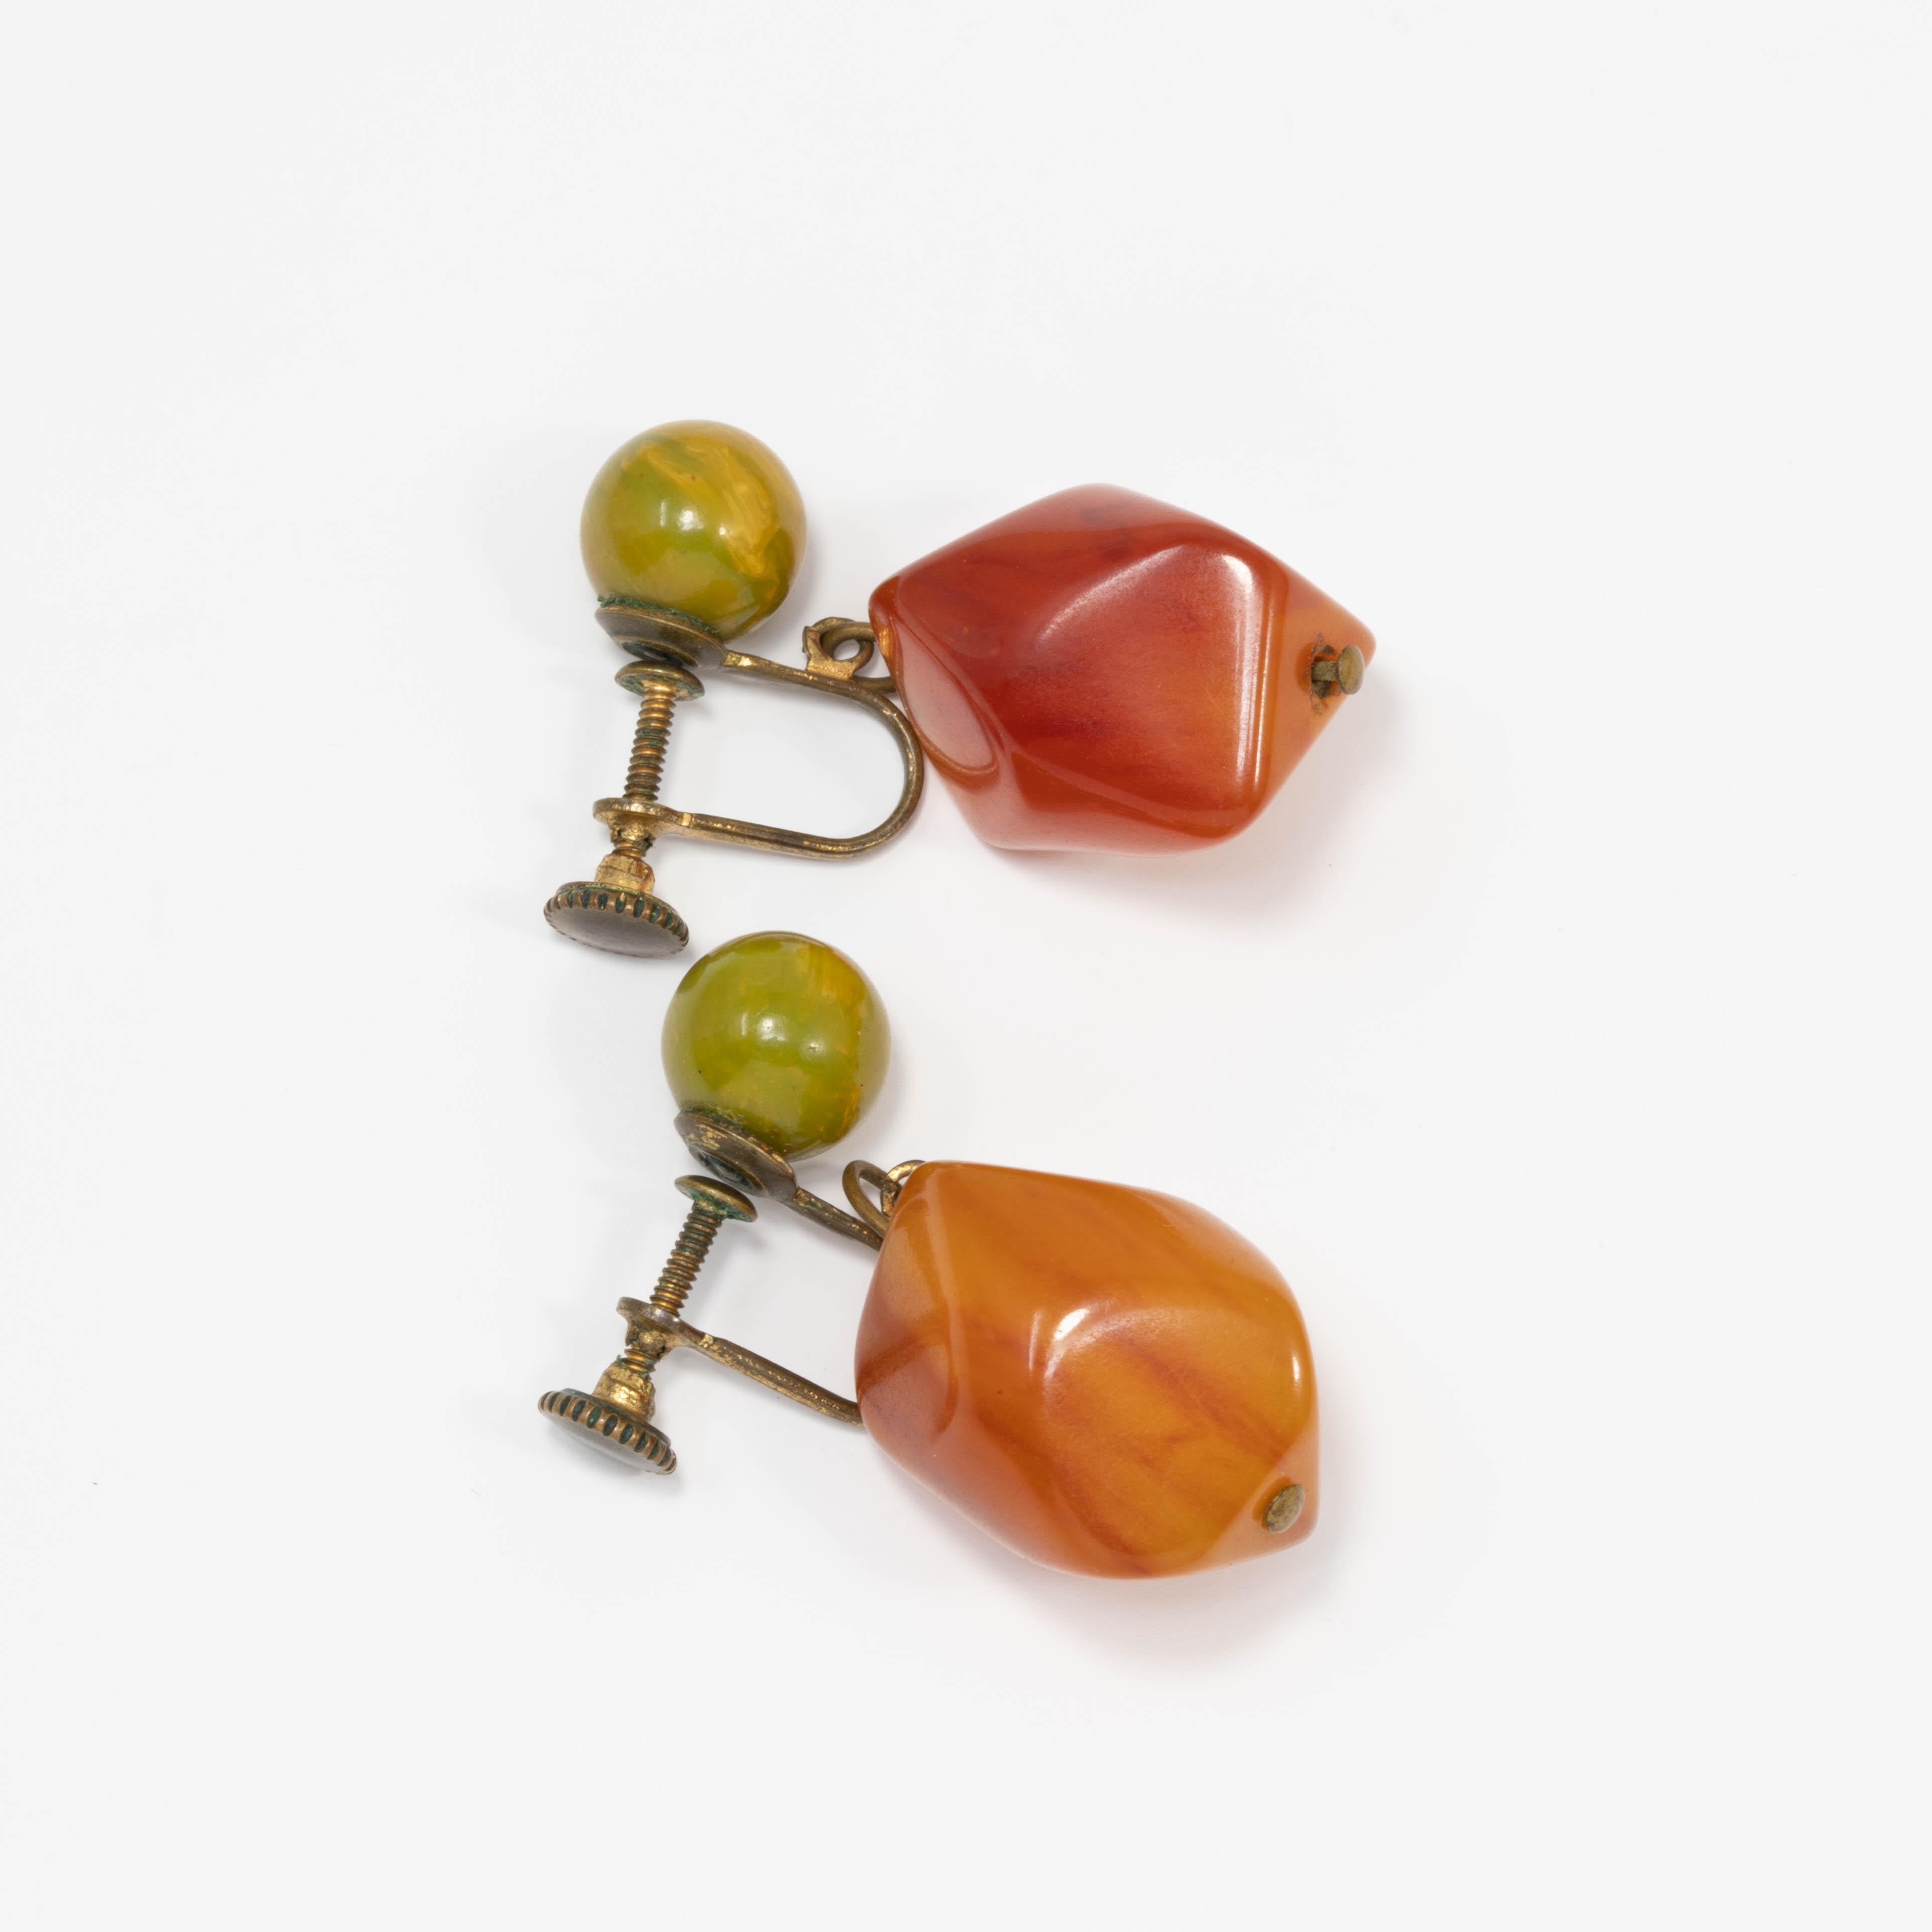 A pair of vintage bakelite dangle earrings. Features an apple green bakelite bead and a dangling amber orange bakelite accent for a complimentary contrast. Vintage brass-tone screw back closure.